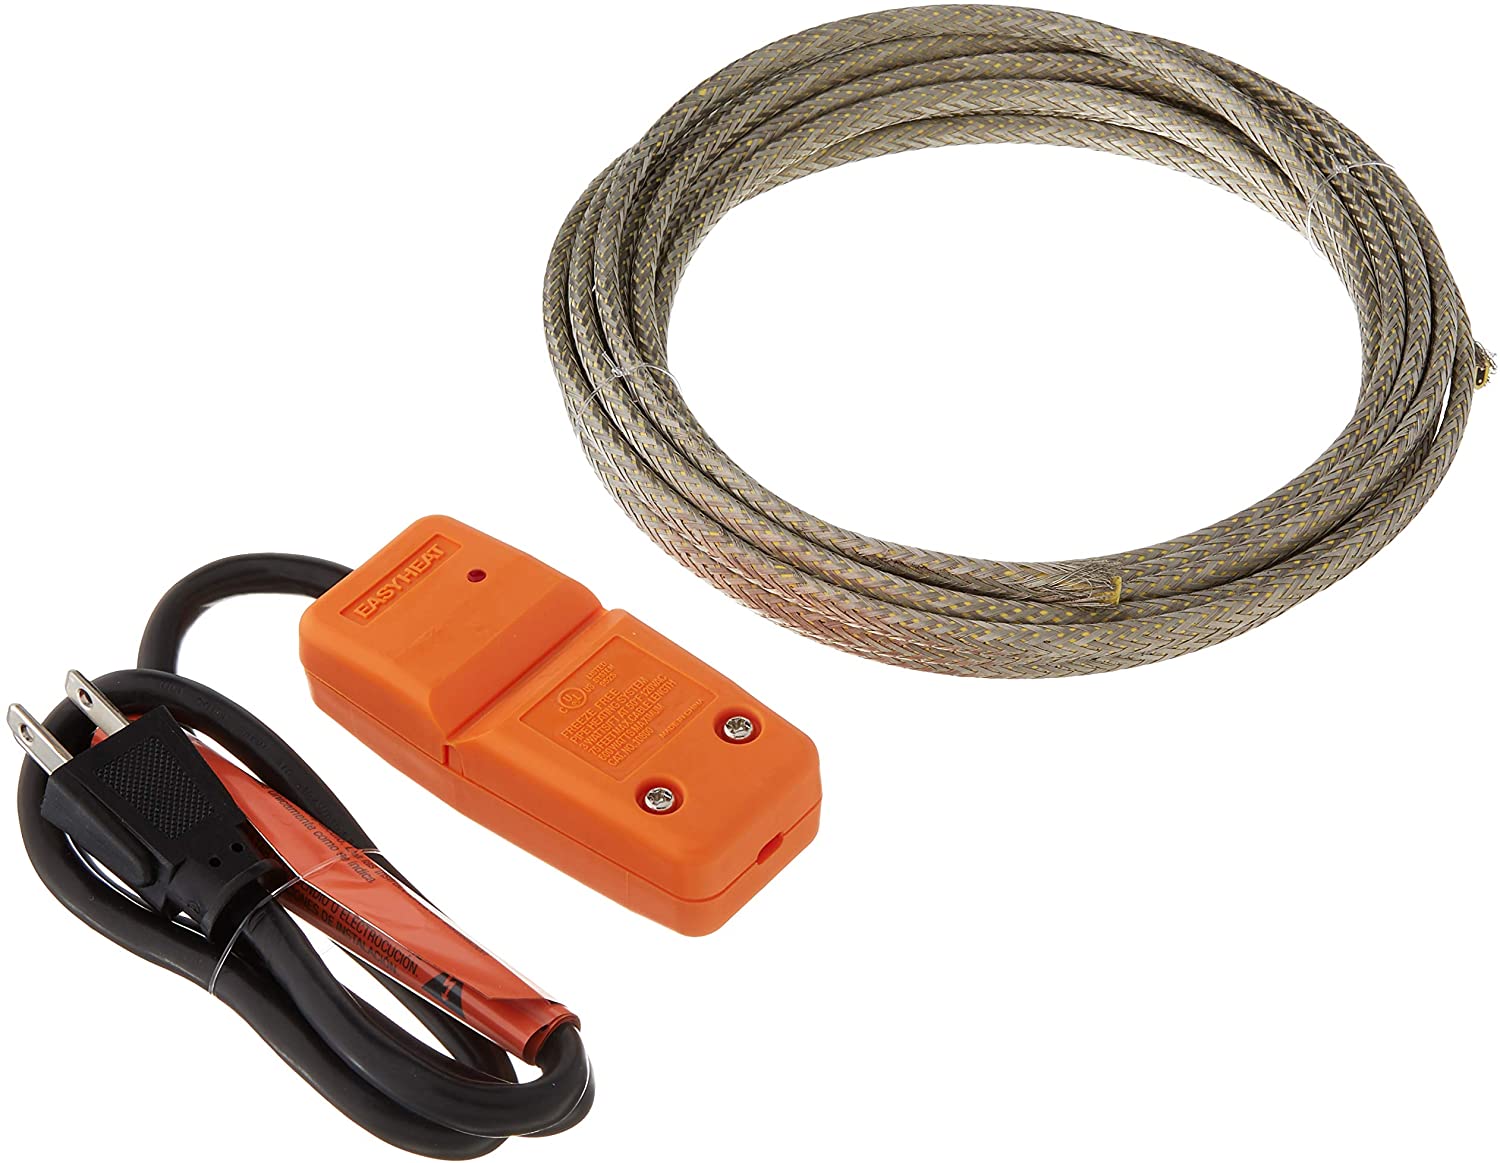 Easy Heat Heating Cable Per Foot Stop pipes from freezing SS braided PER  FOOT!